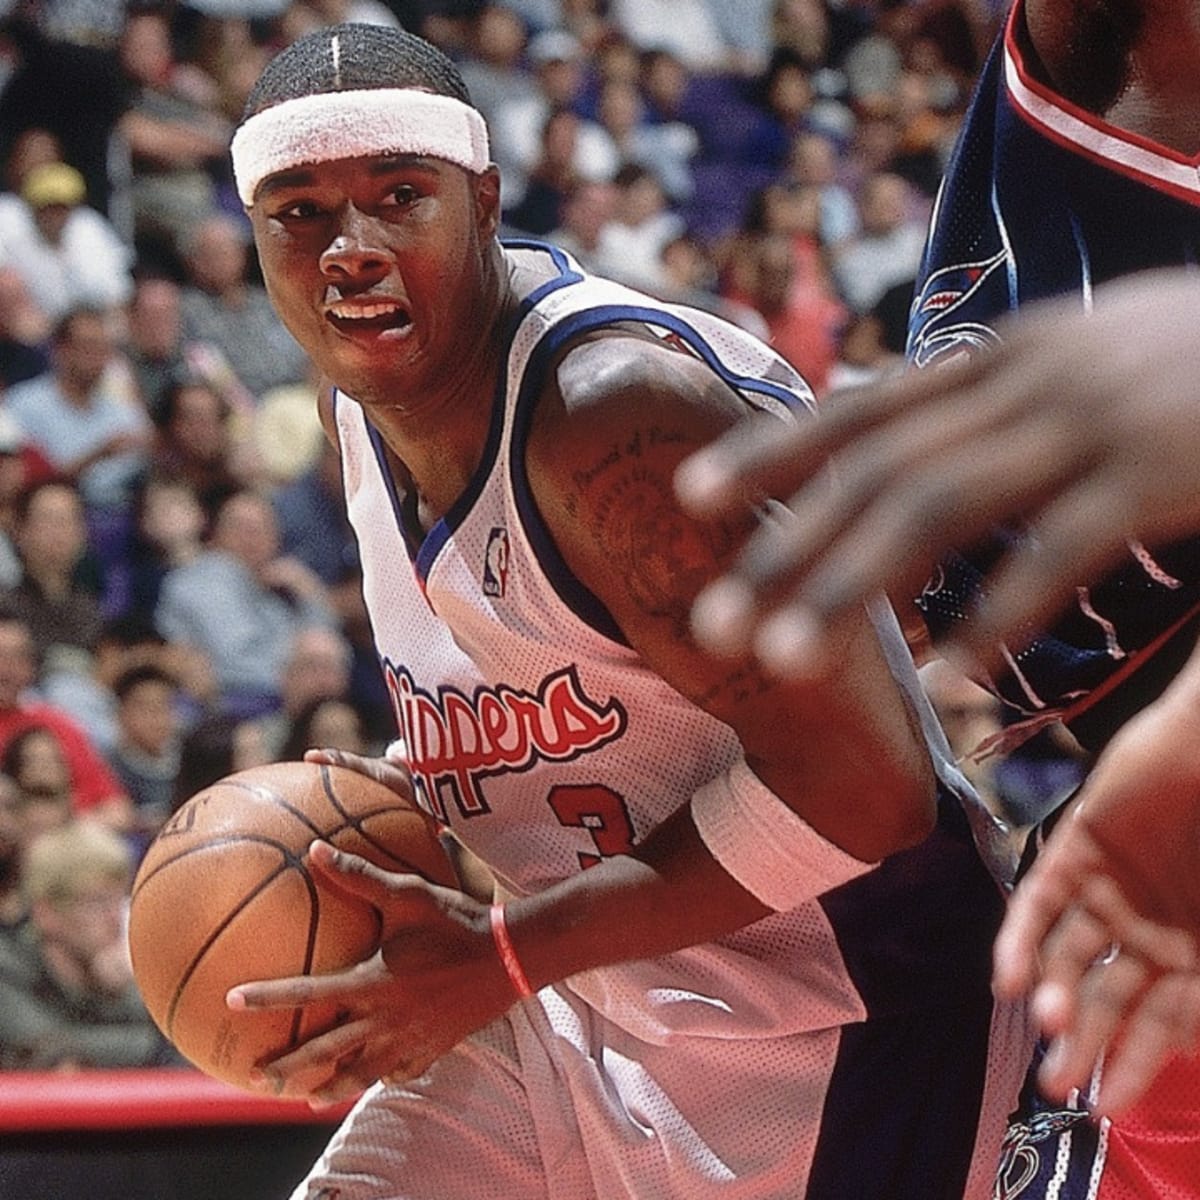 Clips: Knuckleheads with Quentin Richardson and Darius Miles 